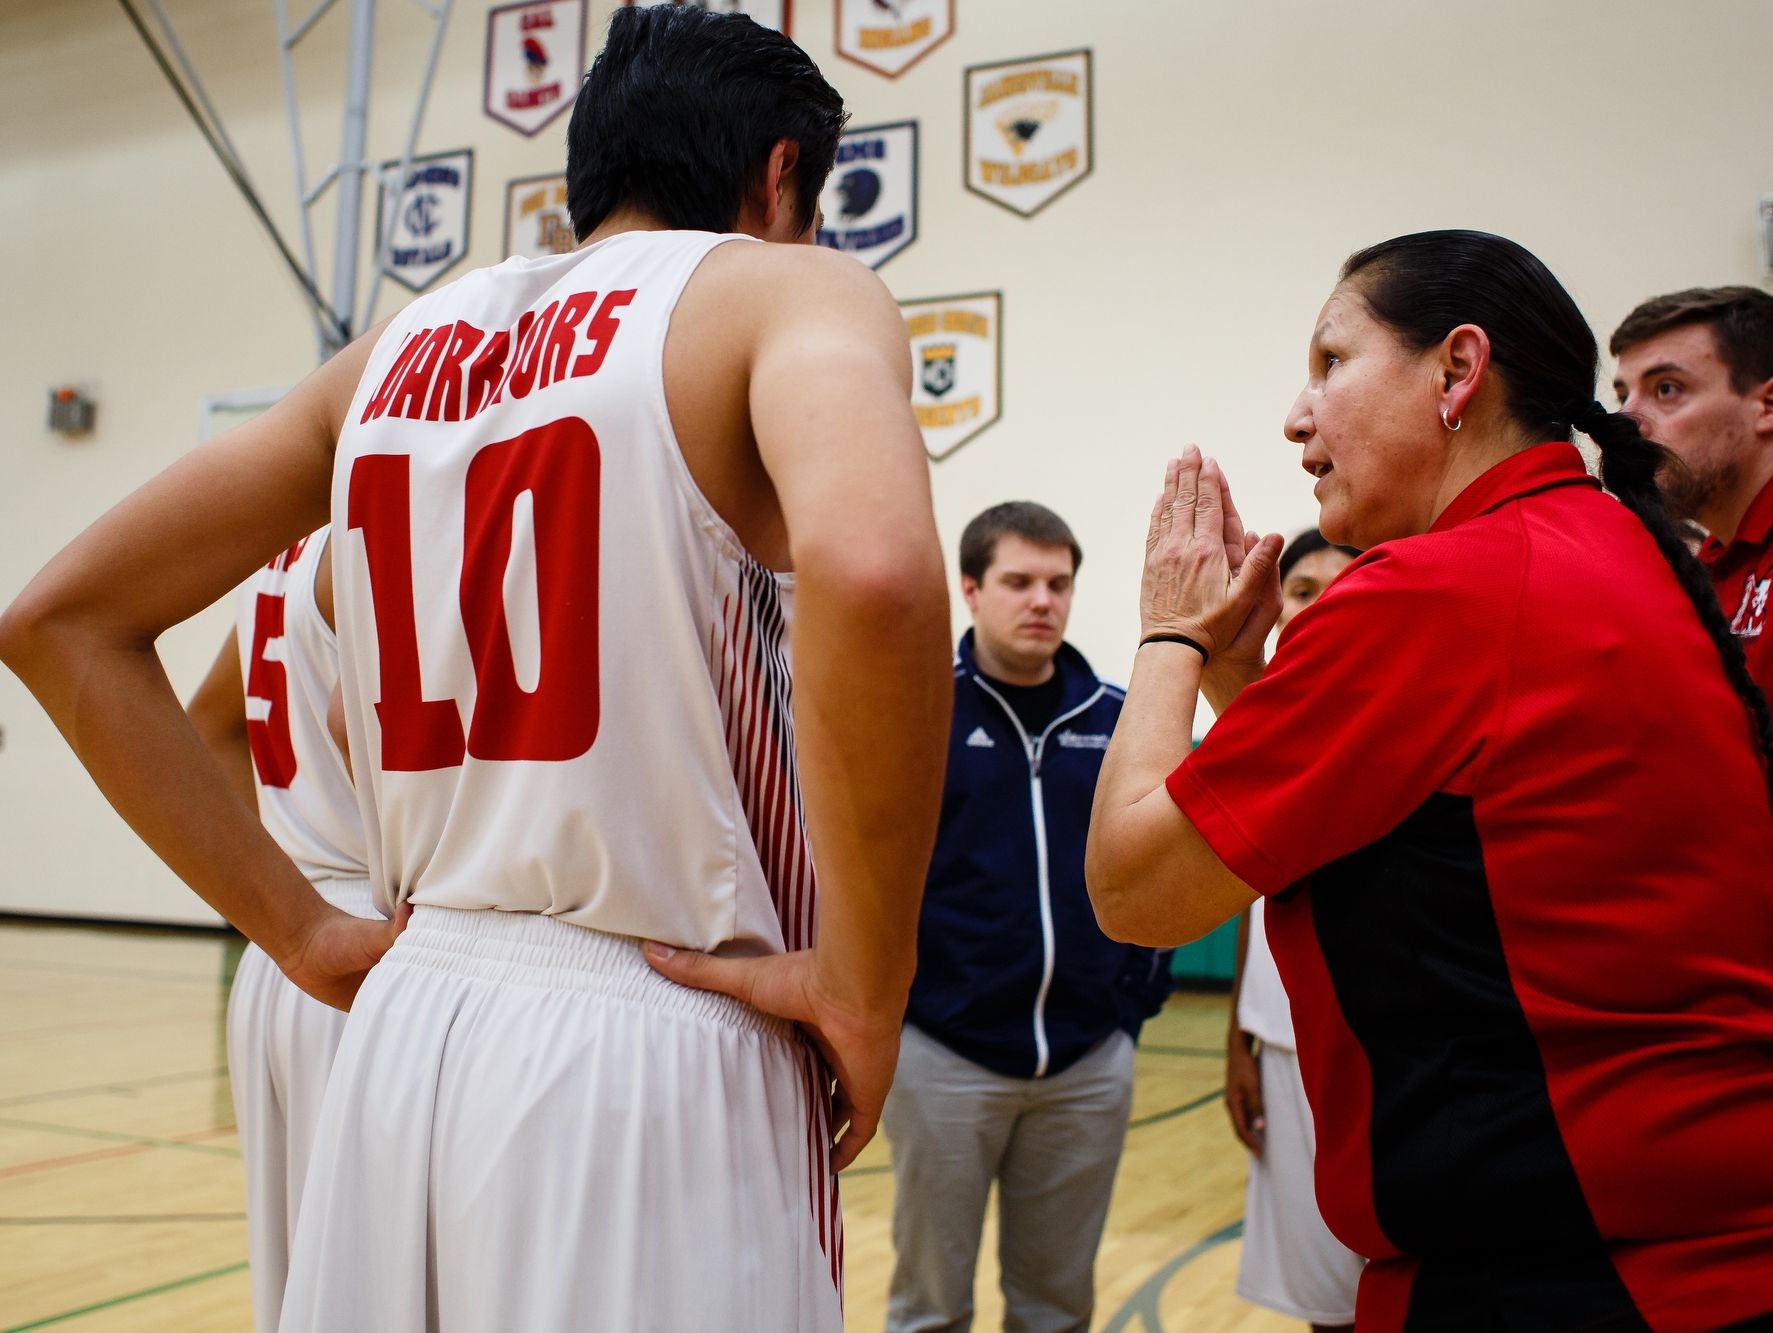 Meskwaki boys' basketball coach Dina Keahna is the only female varsity coach in the state. Her goal she said is to teach the boys life skills through the sport and, "do the the little things and let the score take care of itself." Here she coaches the team during a game at home on Monday, Dec. 19, 2016, in Tama.